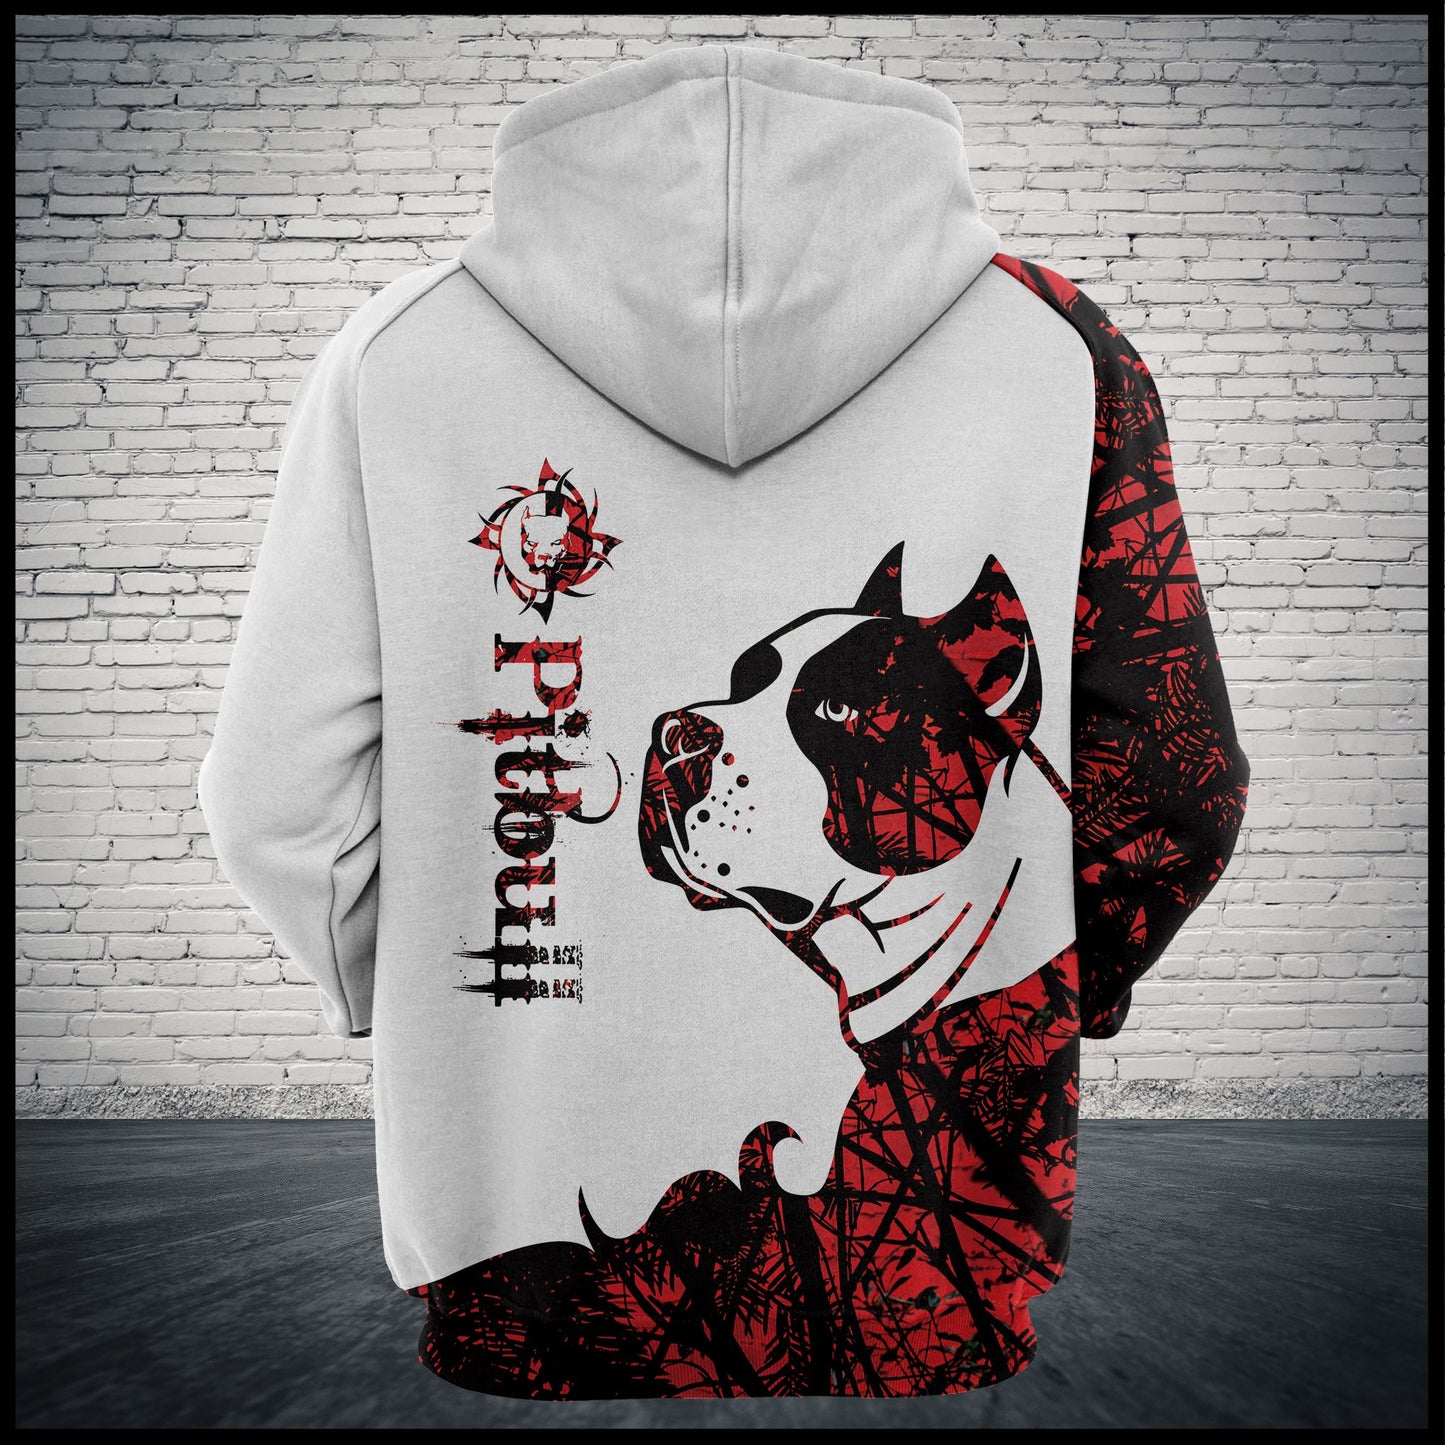 Love Pitbull G5811 - All Over Print Unisex Hoodie unisex womens & mens, couples matching, friends, funny family christmas holiday hoodie gifts (plus size available)